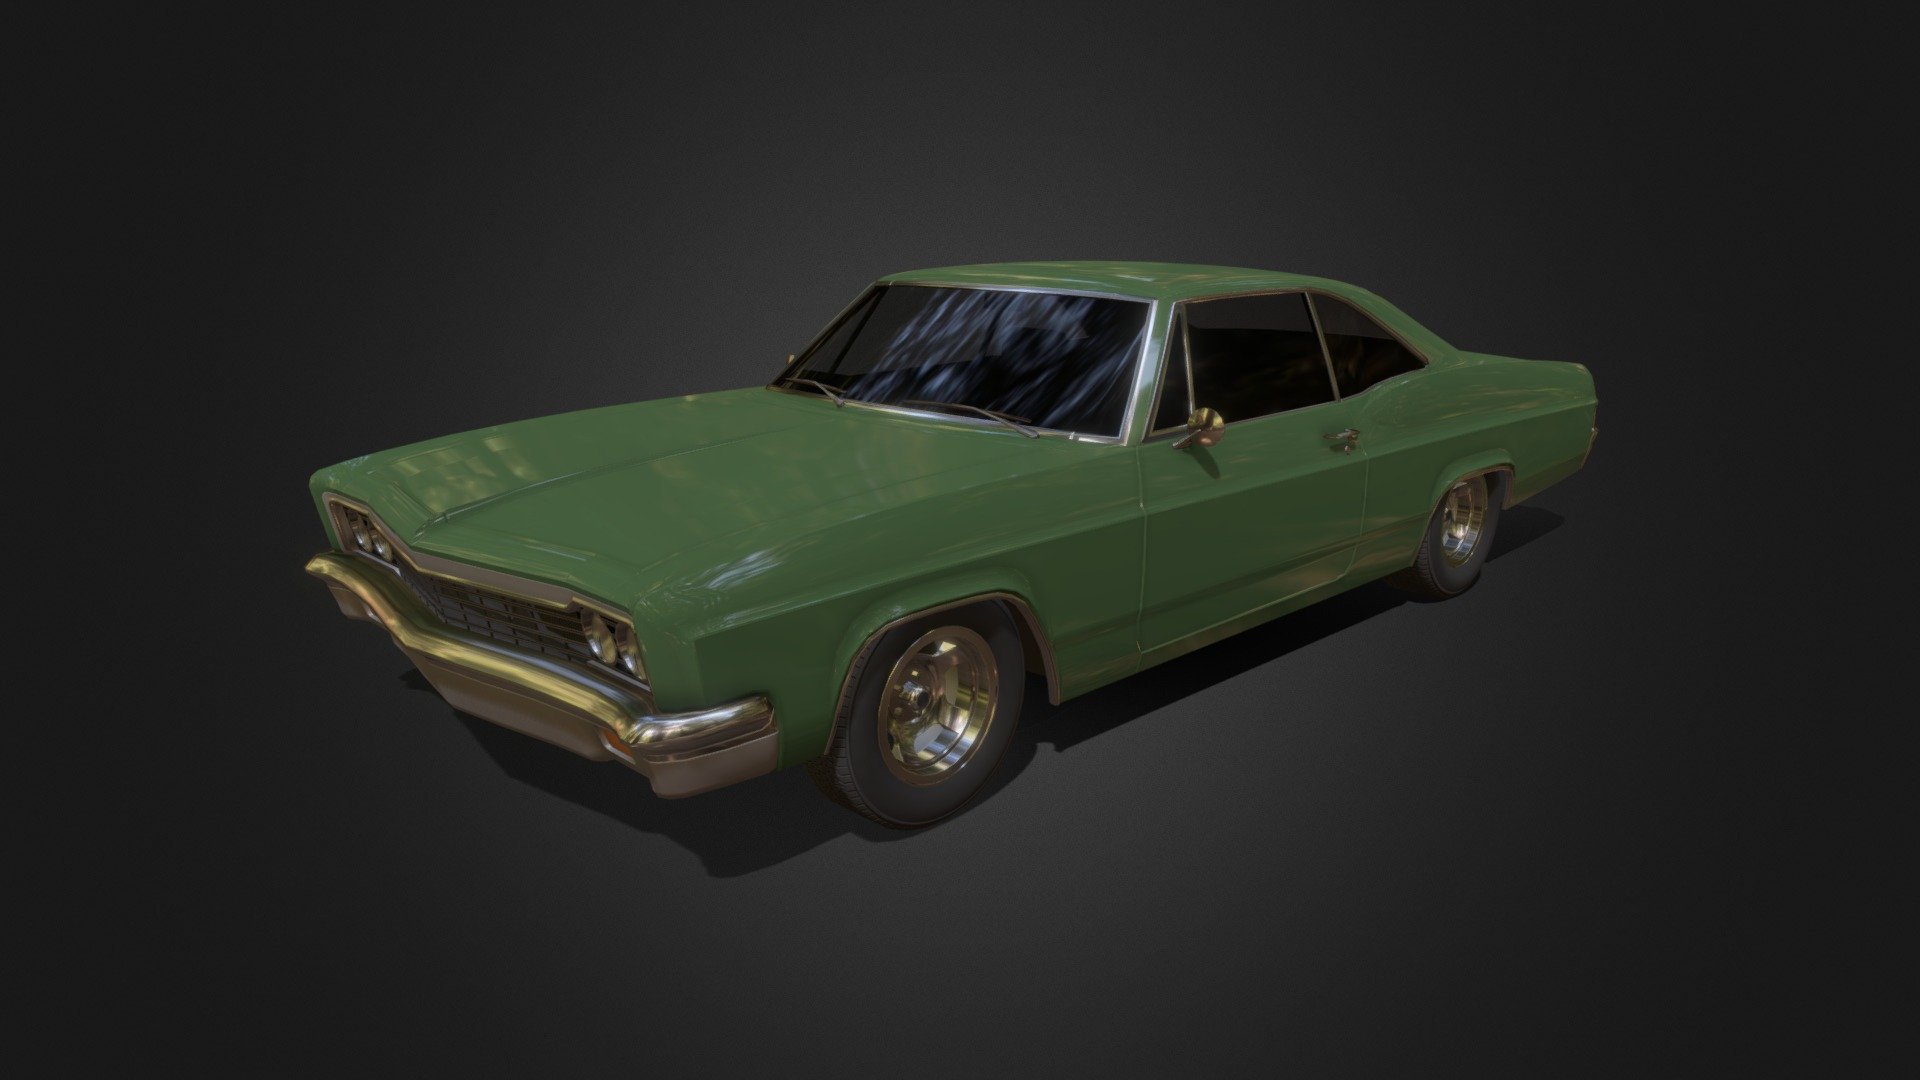 Game-ready vehicle model with Textures, 4 LOD states, and simplified collision meshes.

Vehicle model is based on 1960s car designs with classic muscle car wheels 3d model